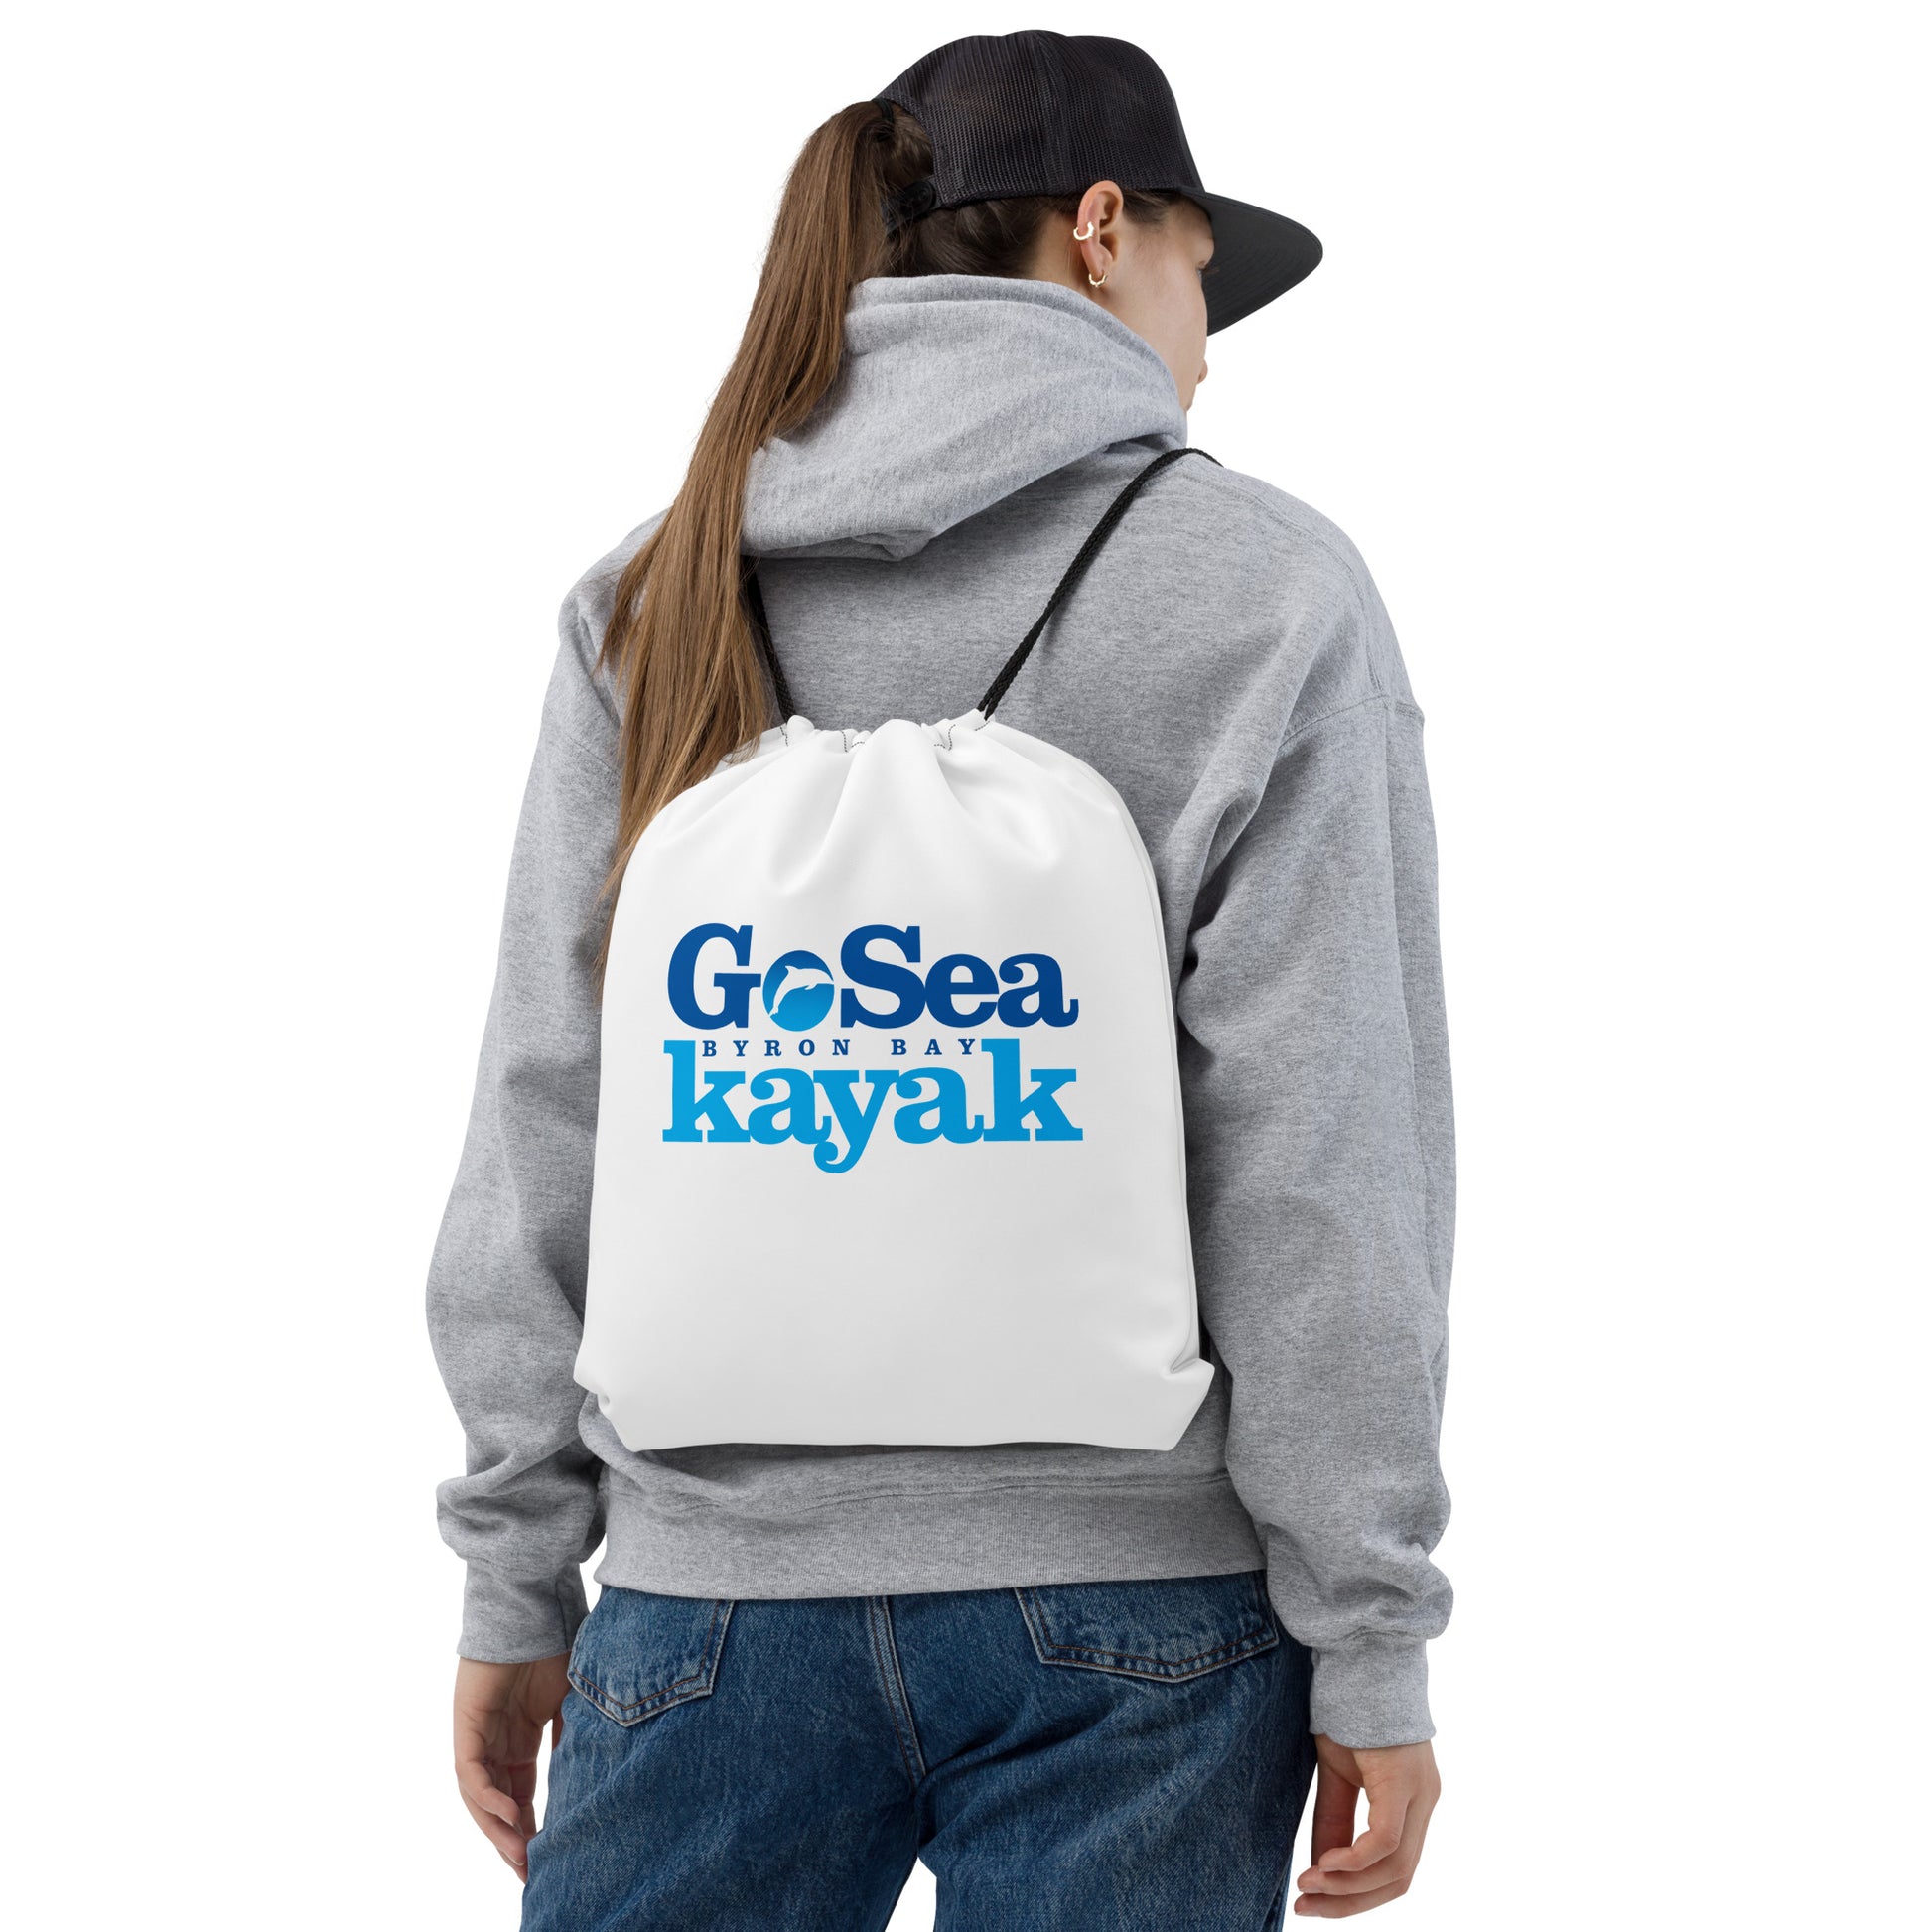  Drawstring Bag - White - Front view - being warn on woman's back - Go Sea Kayak Byron Bay logo on front  - Genuine Byron Bay Merchandise | Produced by Go Sea Kayak Byron Bay 